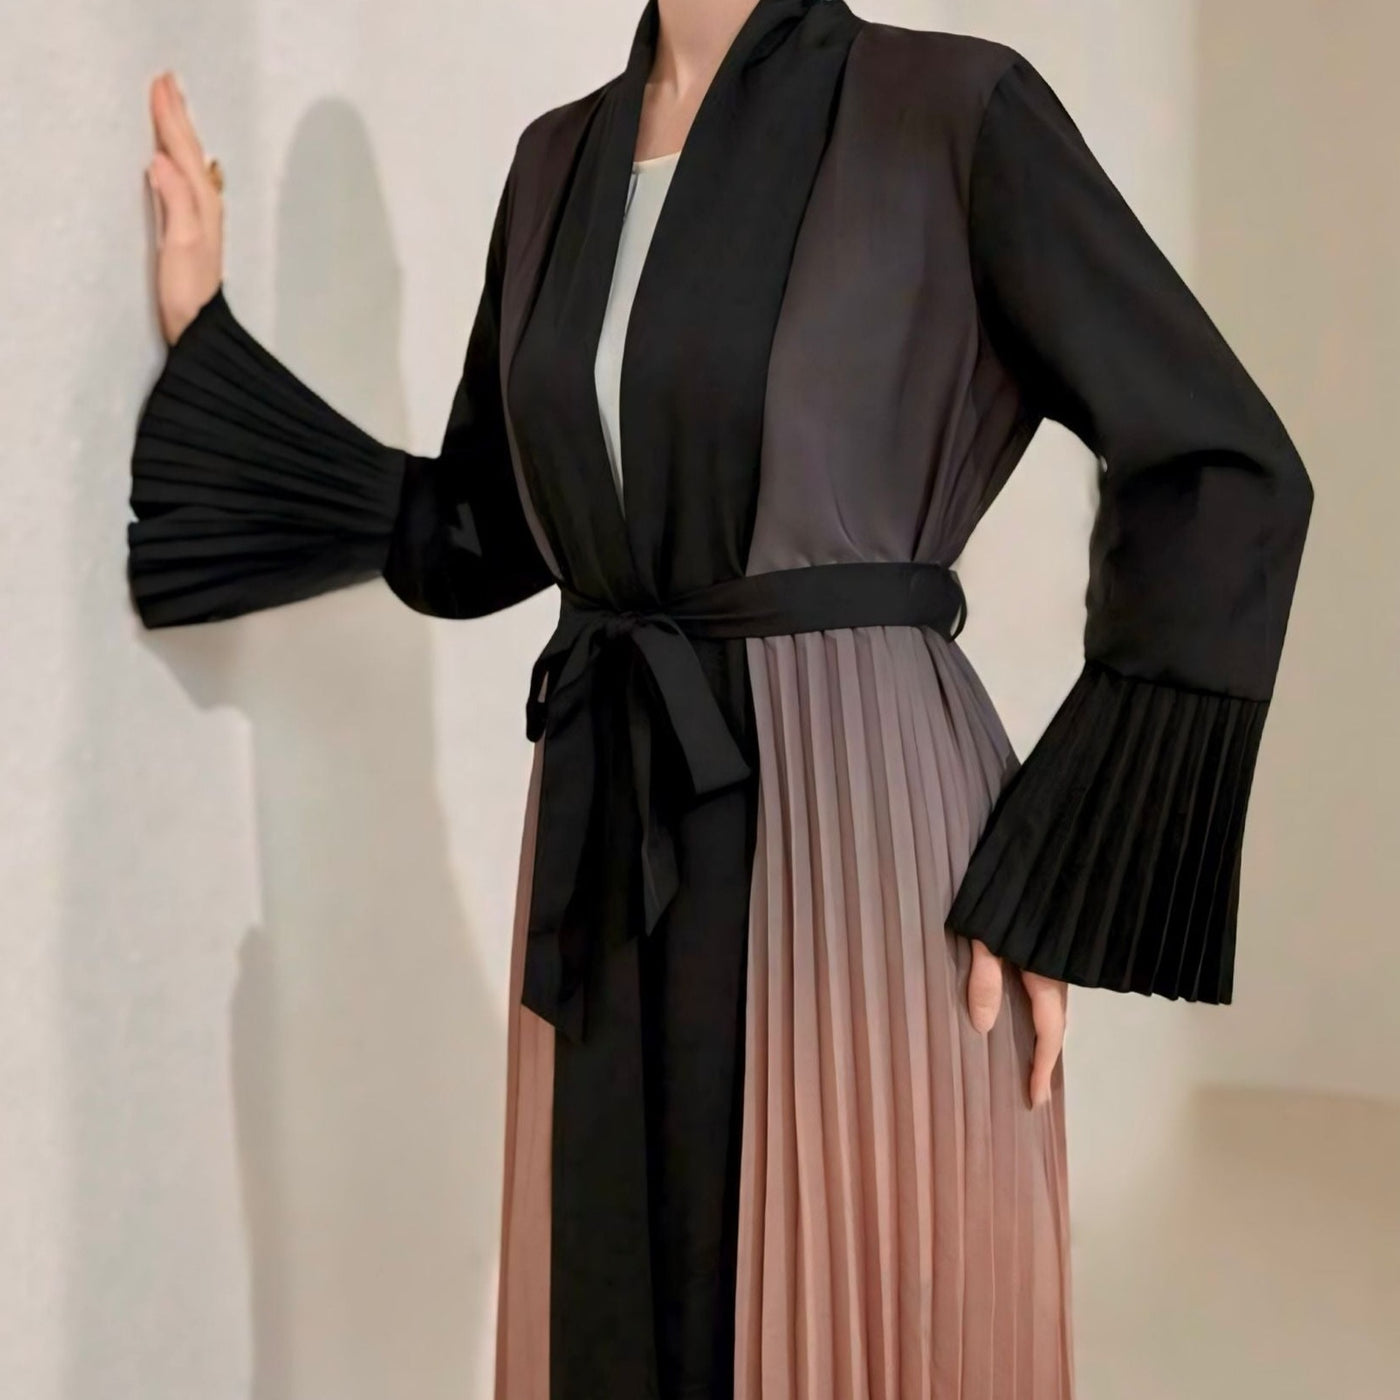 Haneen alsaify X Becosy  in ombre abaya with belt